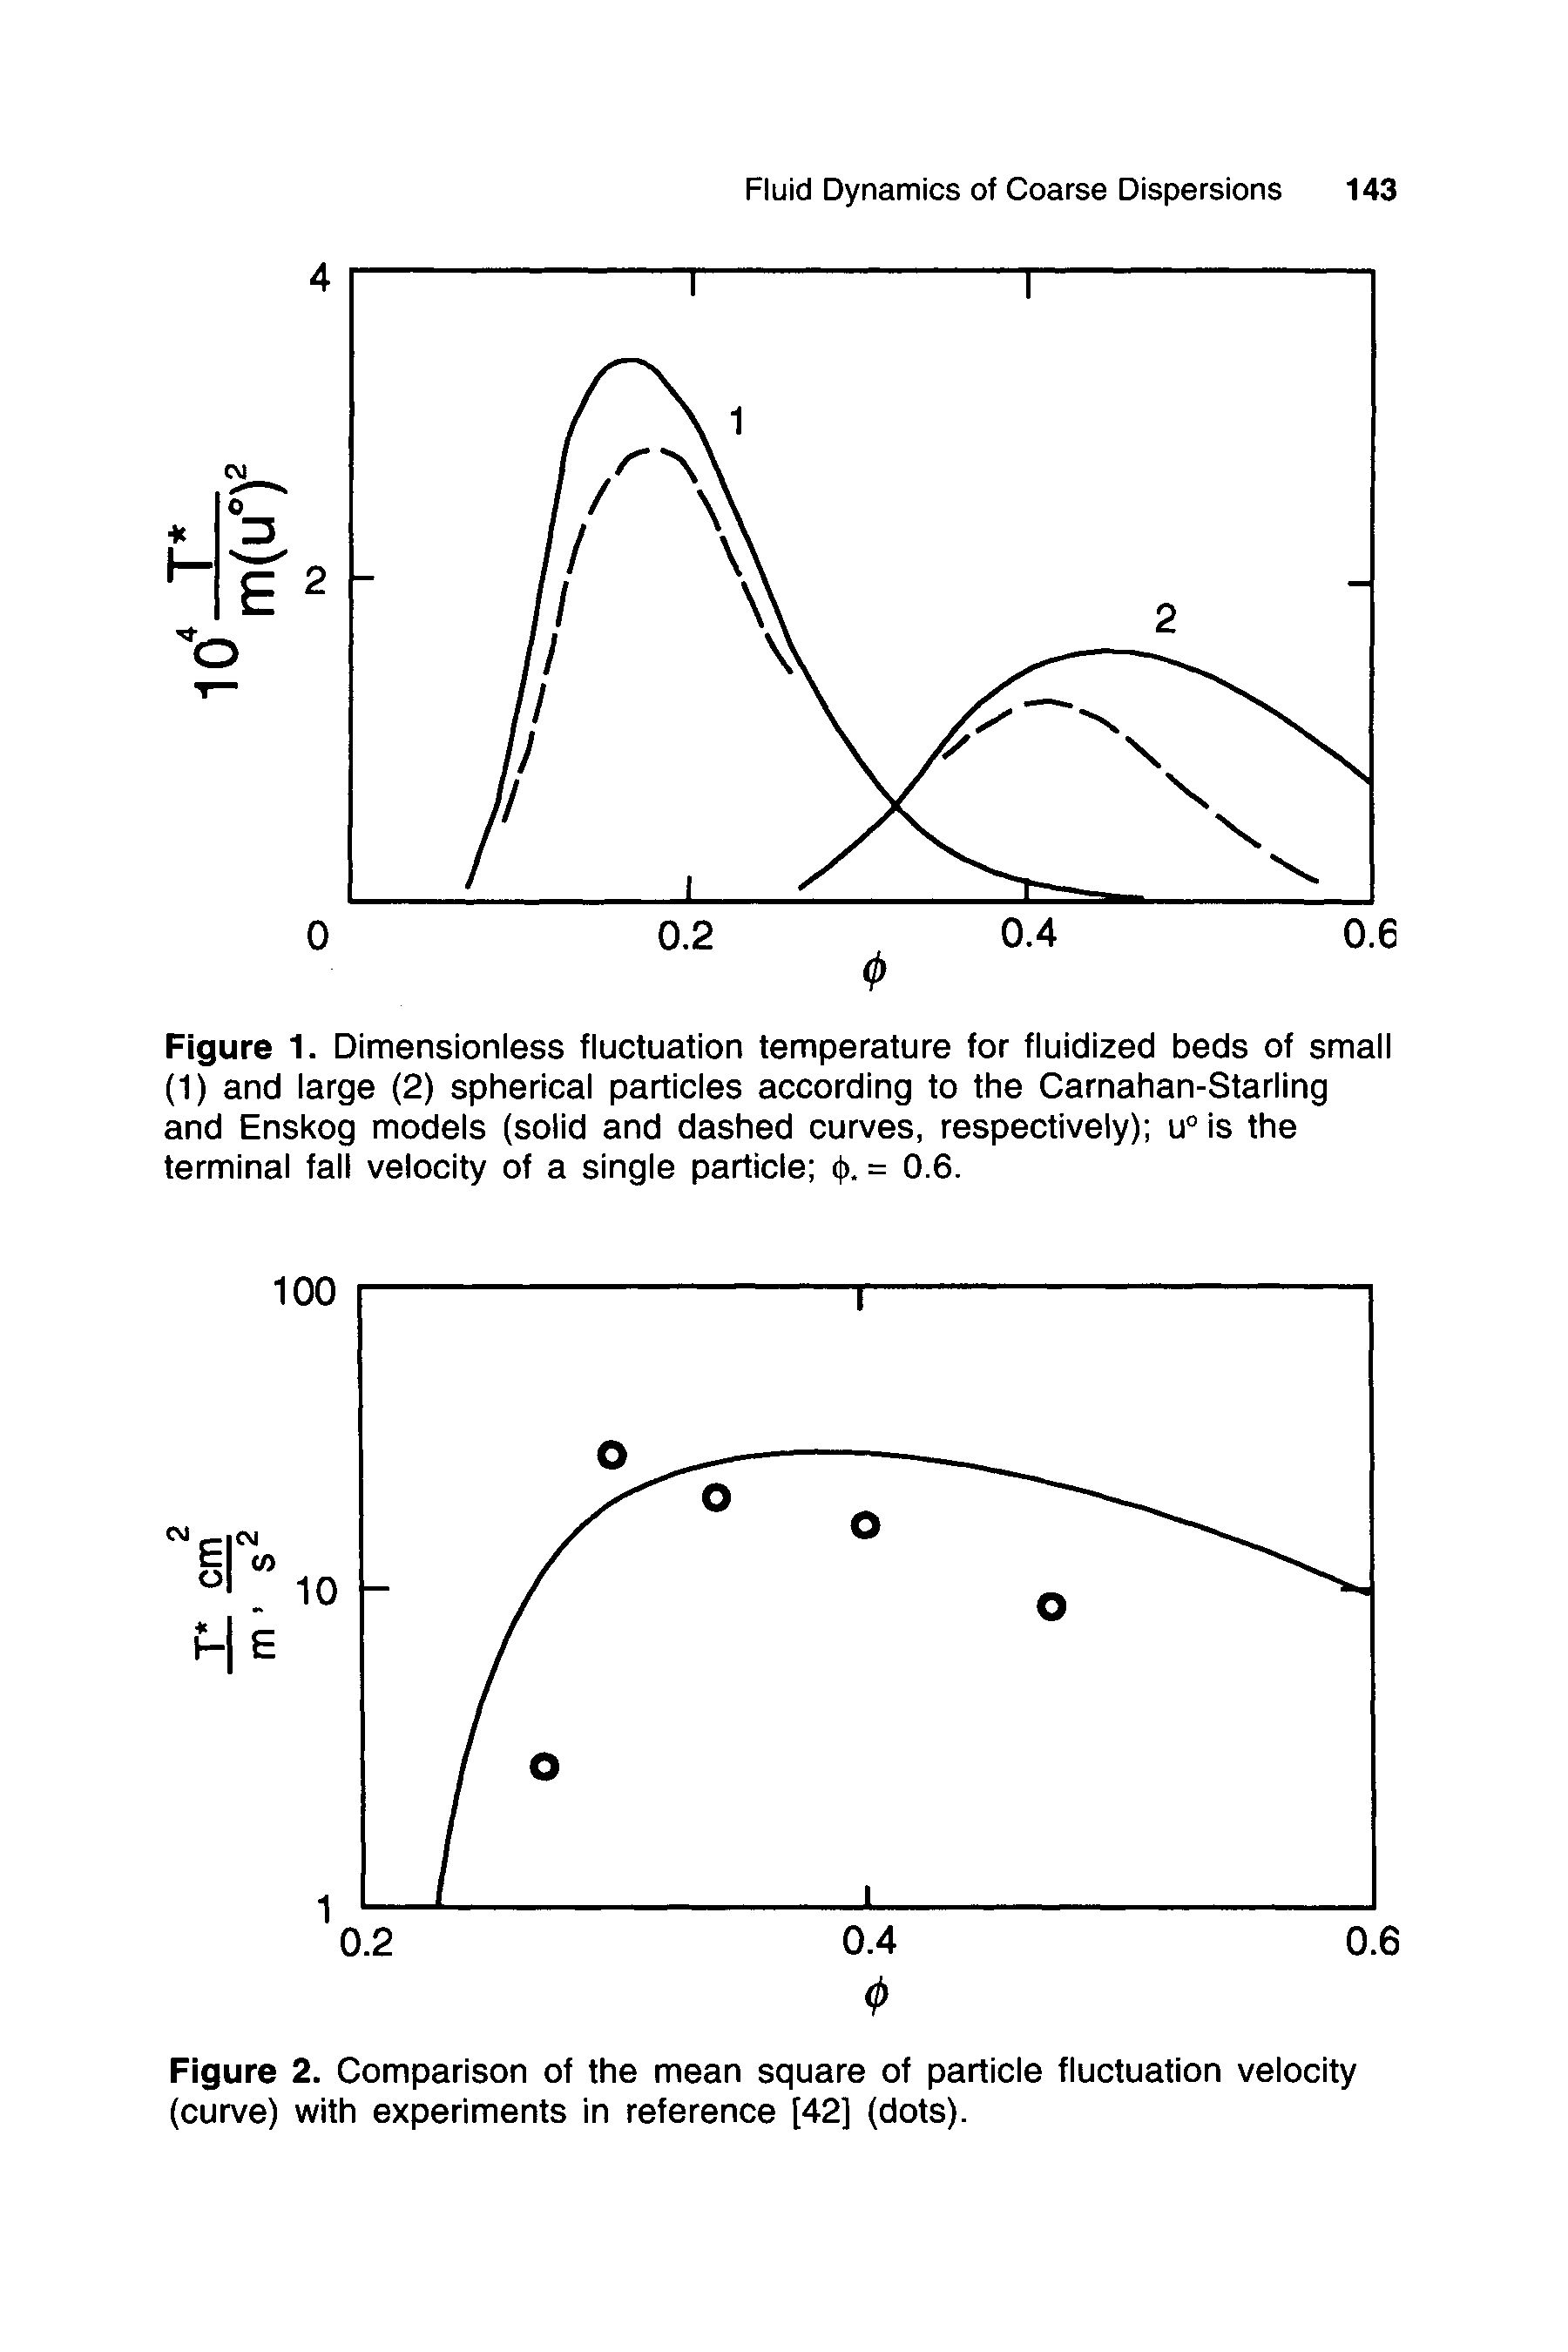 Figure 1. Dimensionless fluctuation temperature for fluidized beds of small (1) and large (2) spherical particles according to the Carnahan-Starling and Enskog models (solid and dashed curves, respectively) u° is the terminal fall velocity of a single particle (j). = 0.6.